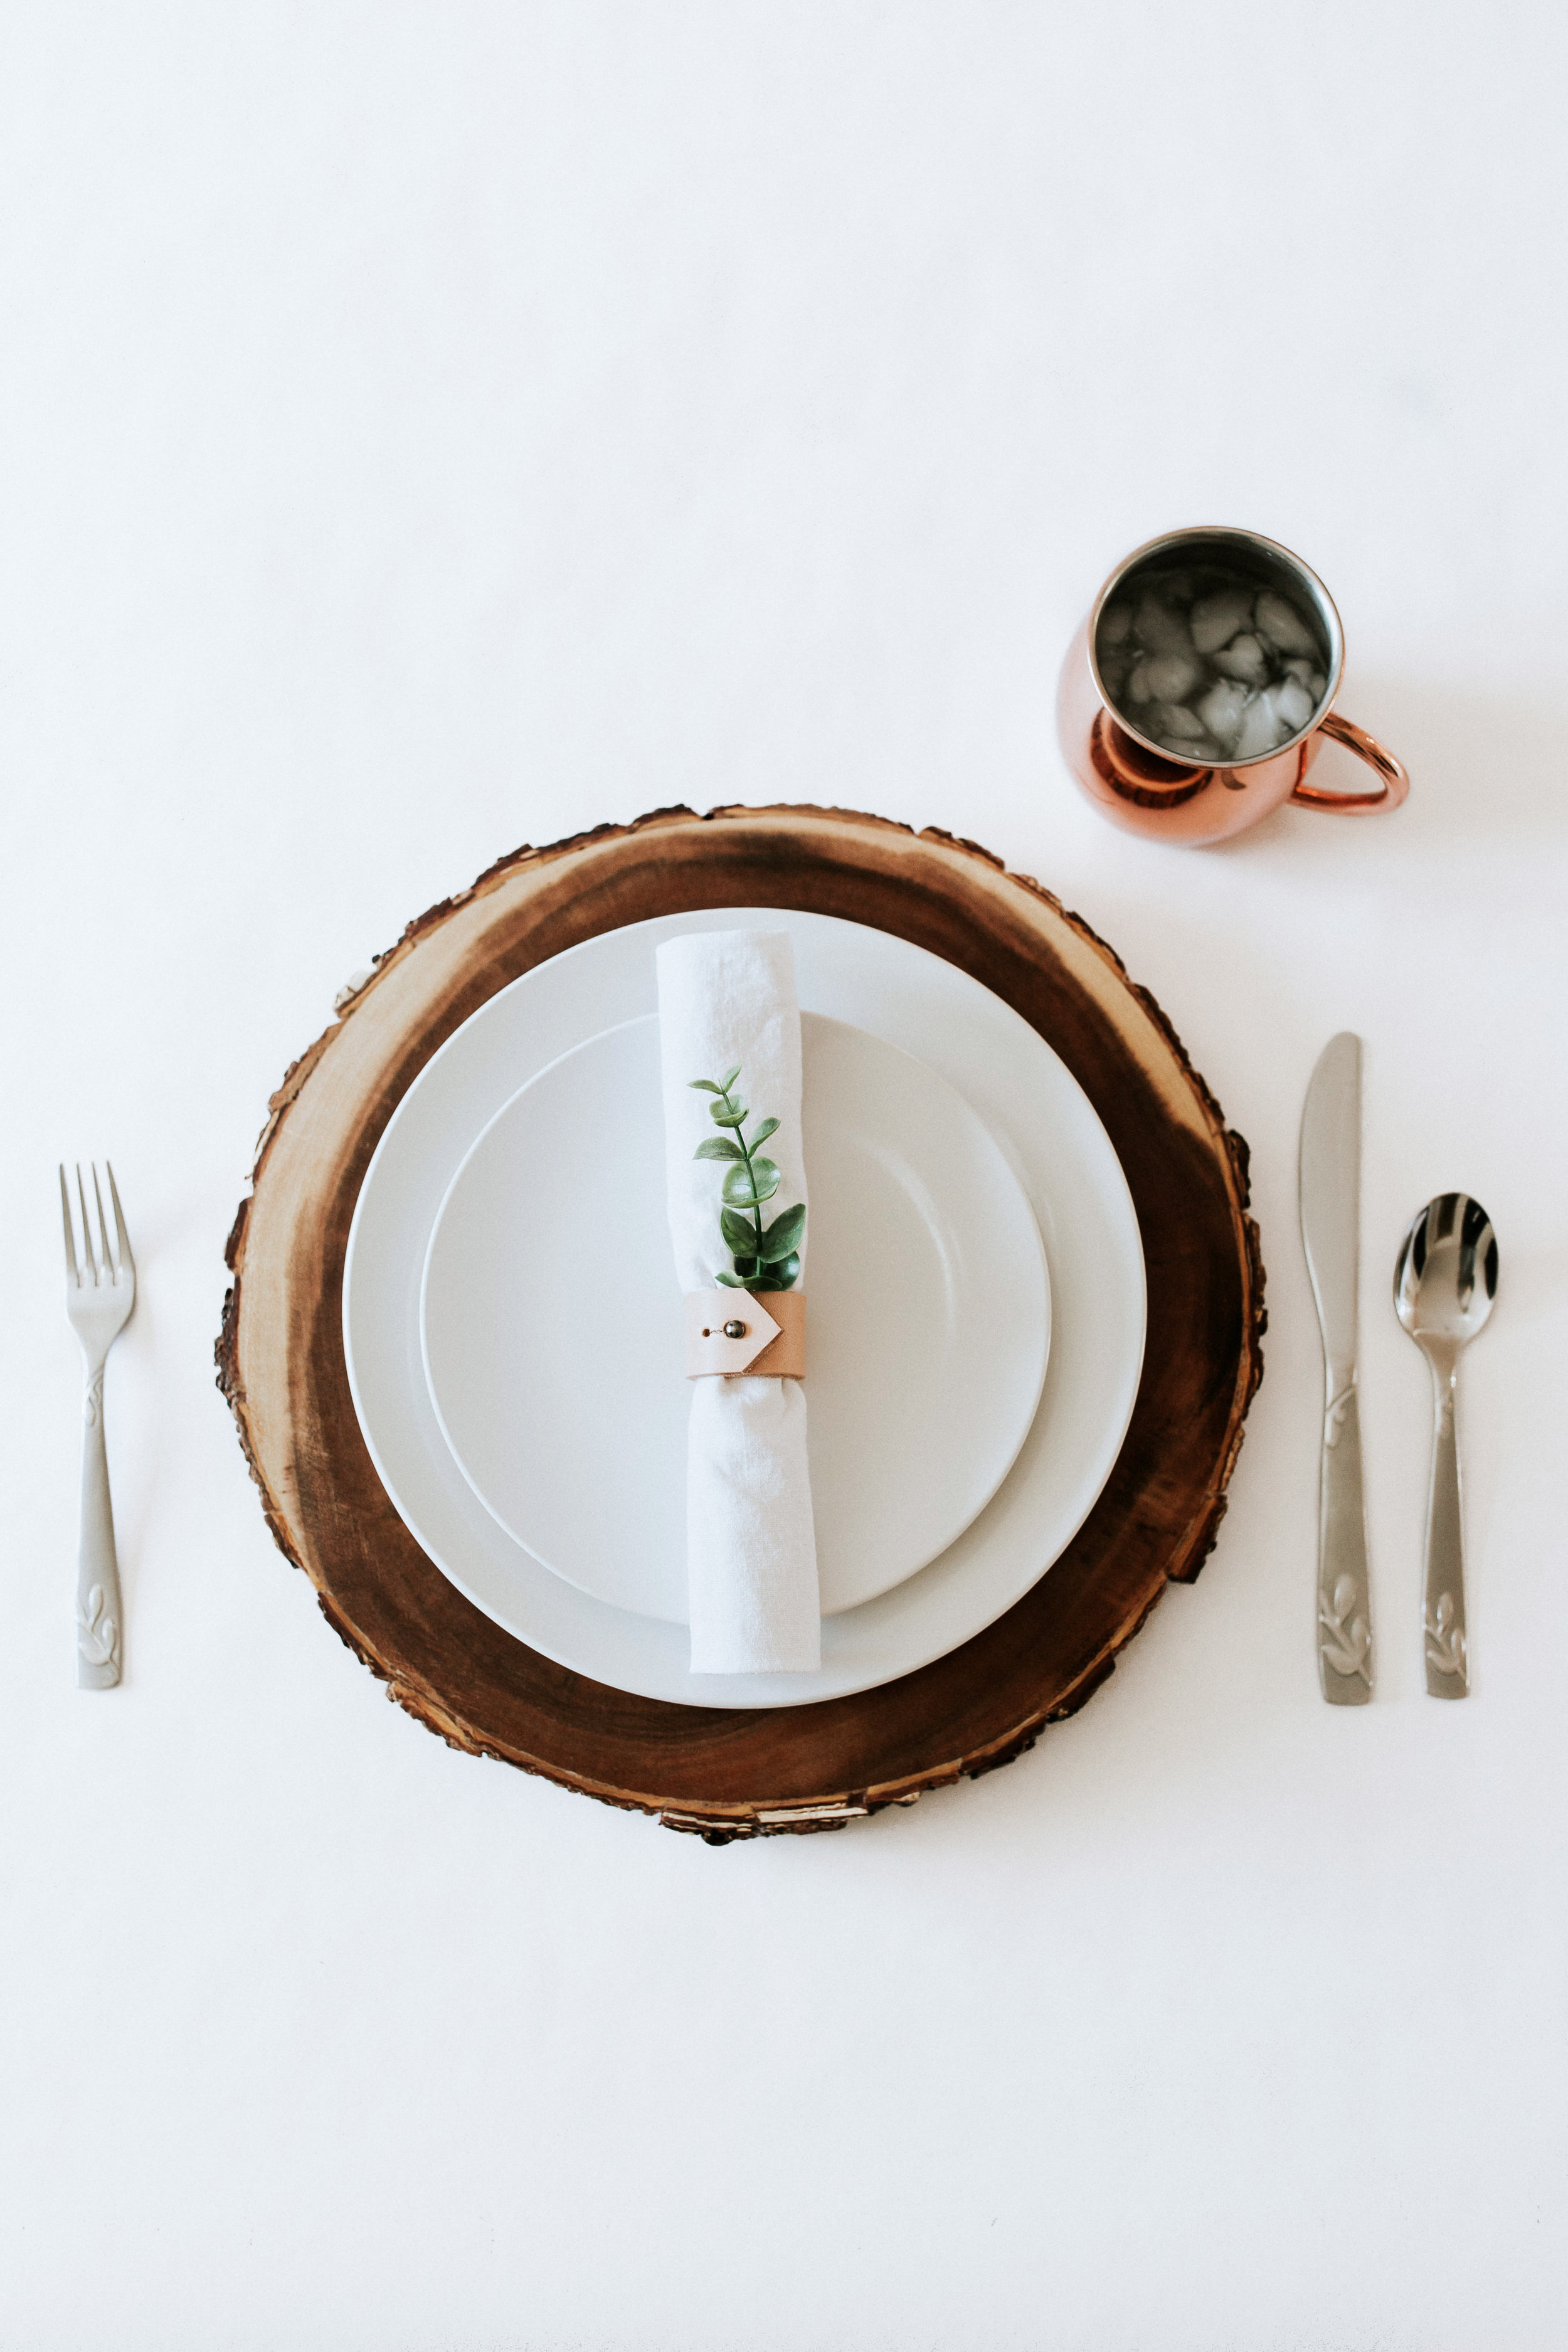 How to create / DIY a natural minimal table setting - wood charger, white plates, white napkin, leather napkin rings, greenery